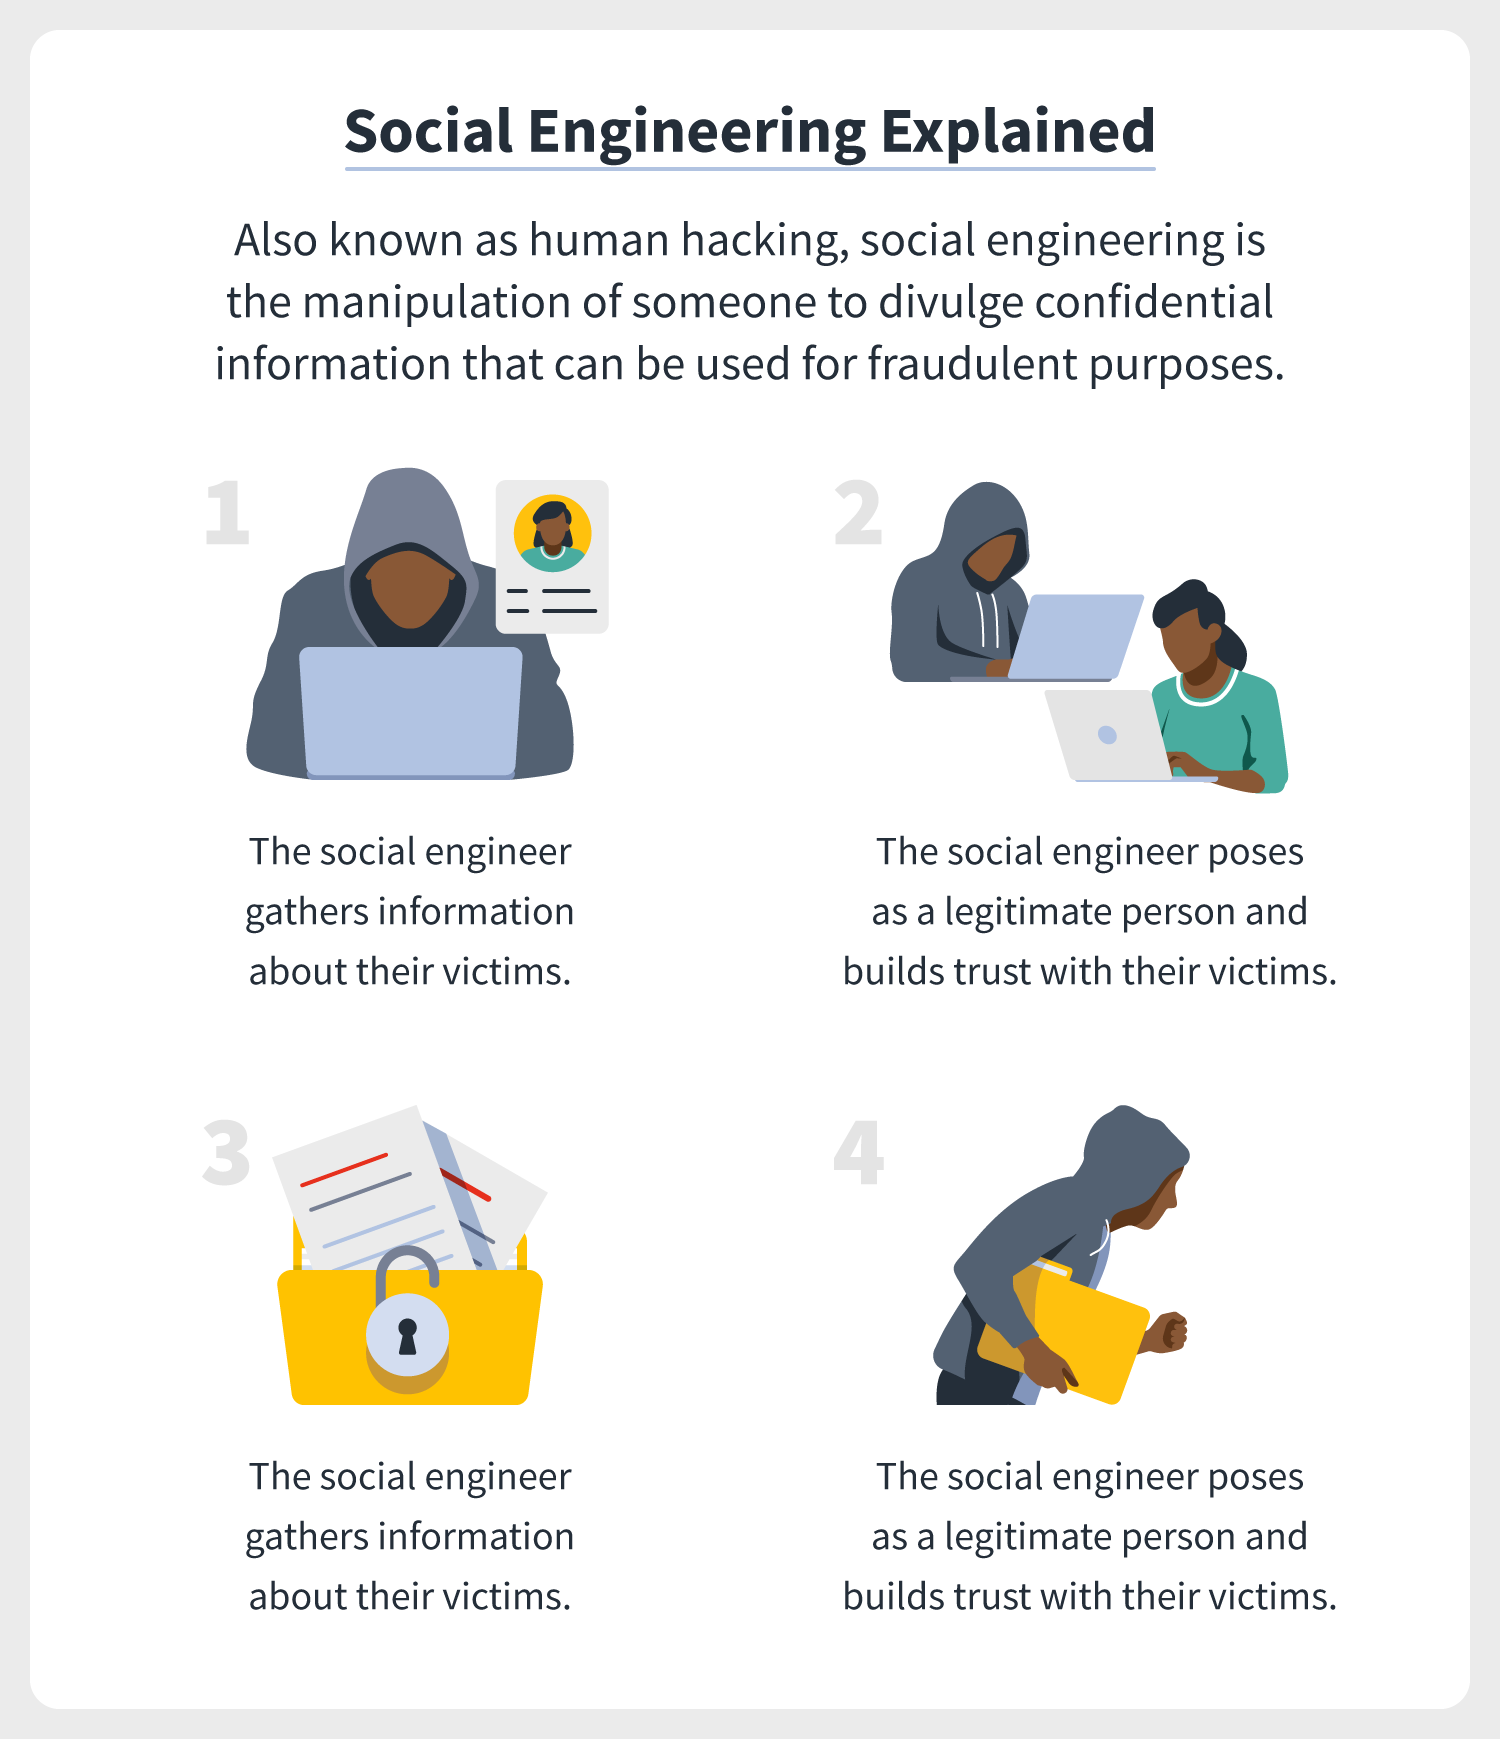 a case study in social engineering